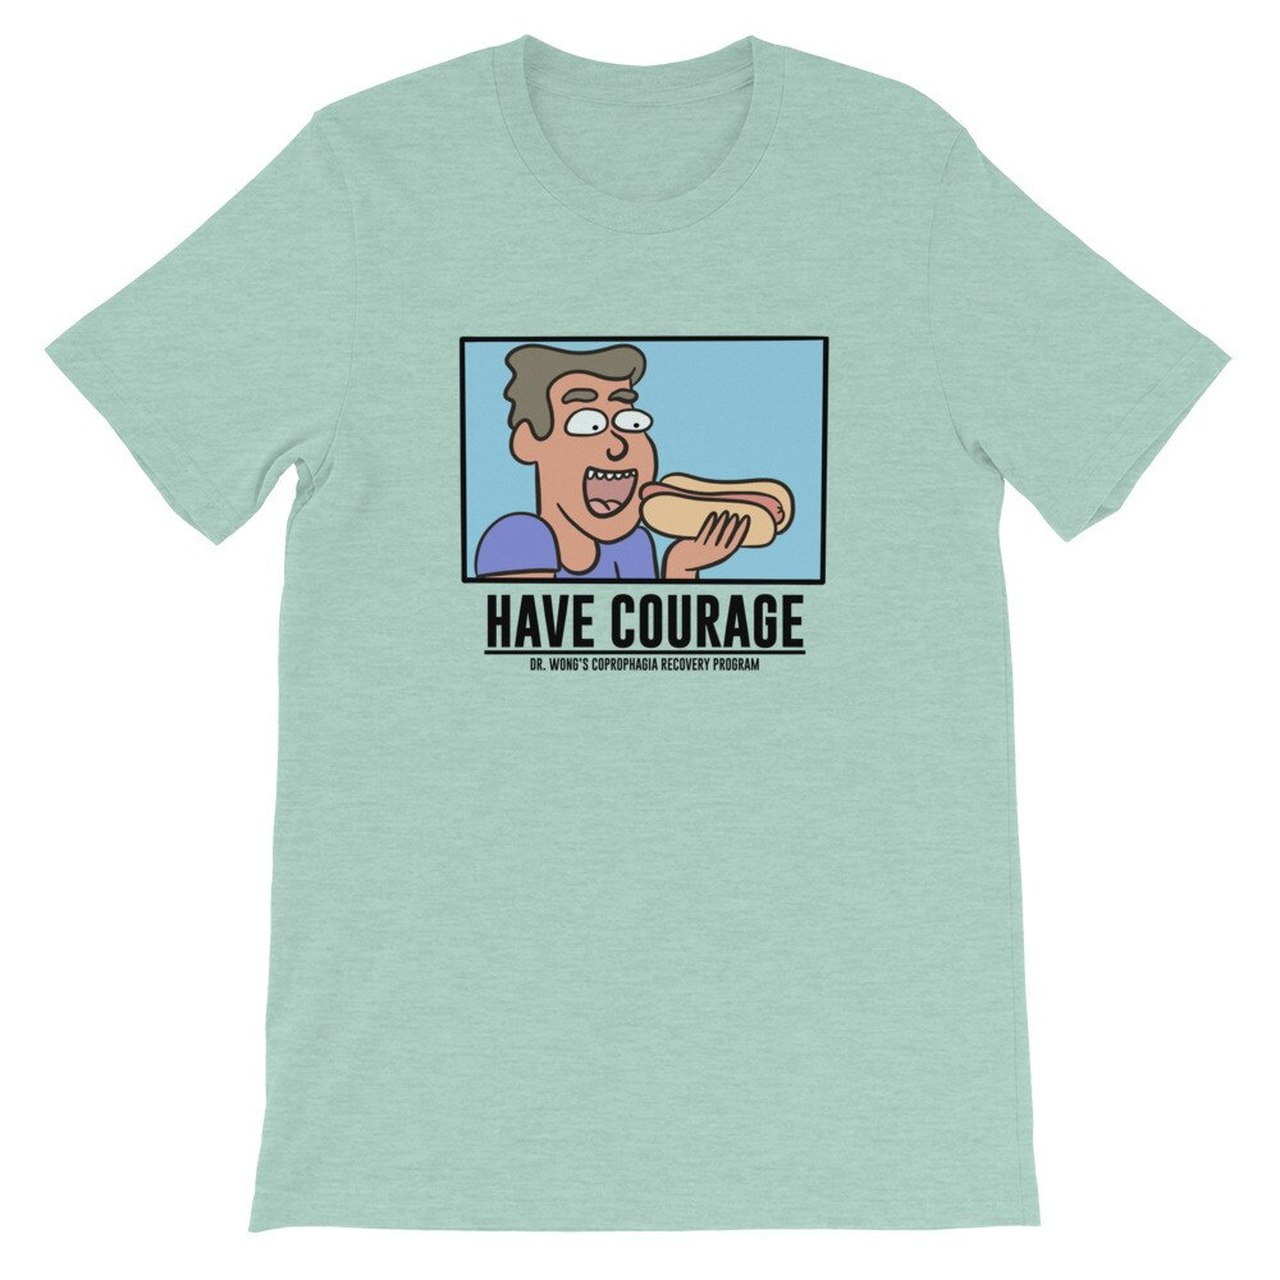 Rick & Morty Dr. Wong "Have Courage Coprophagia Recovery Program" Unisex T-Shirt